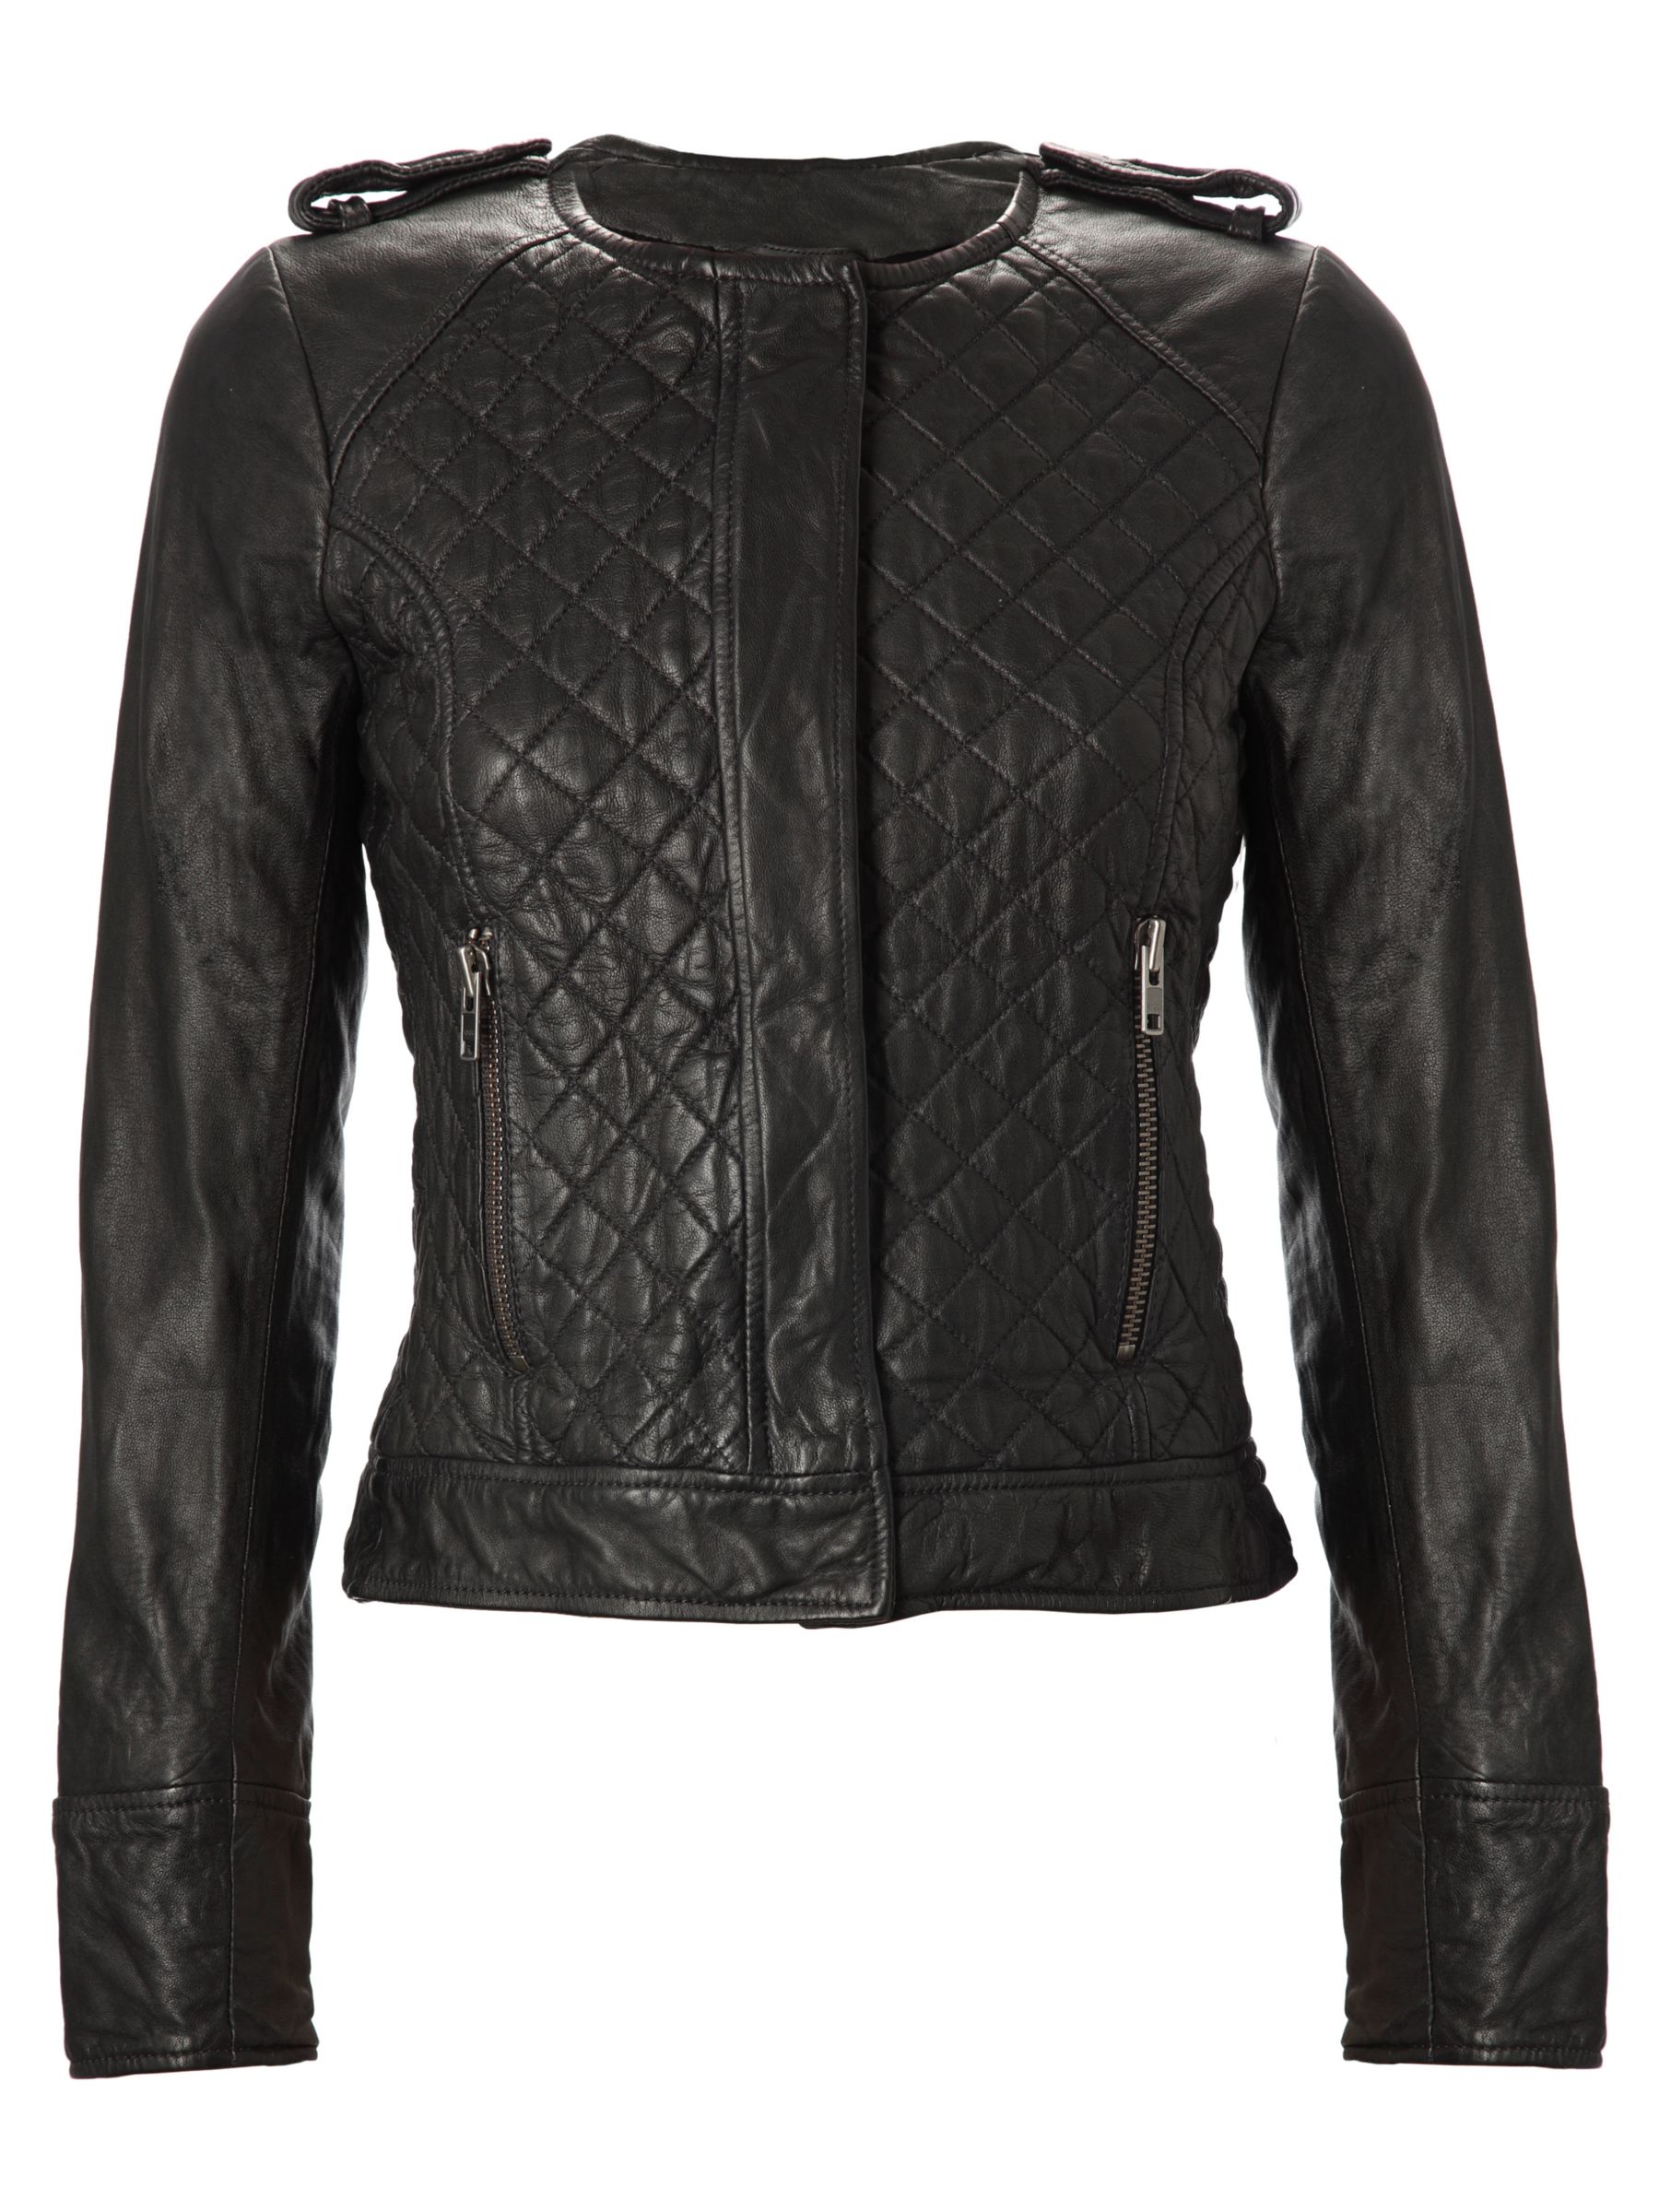 French Connection Collarless Quilted Front Leather Jacket, Black at John Lewis